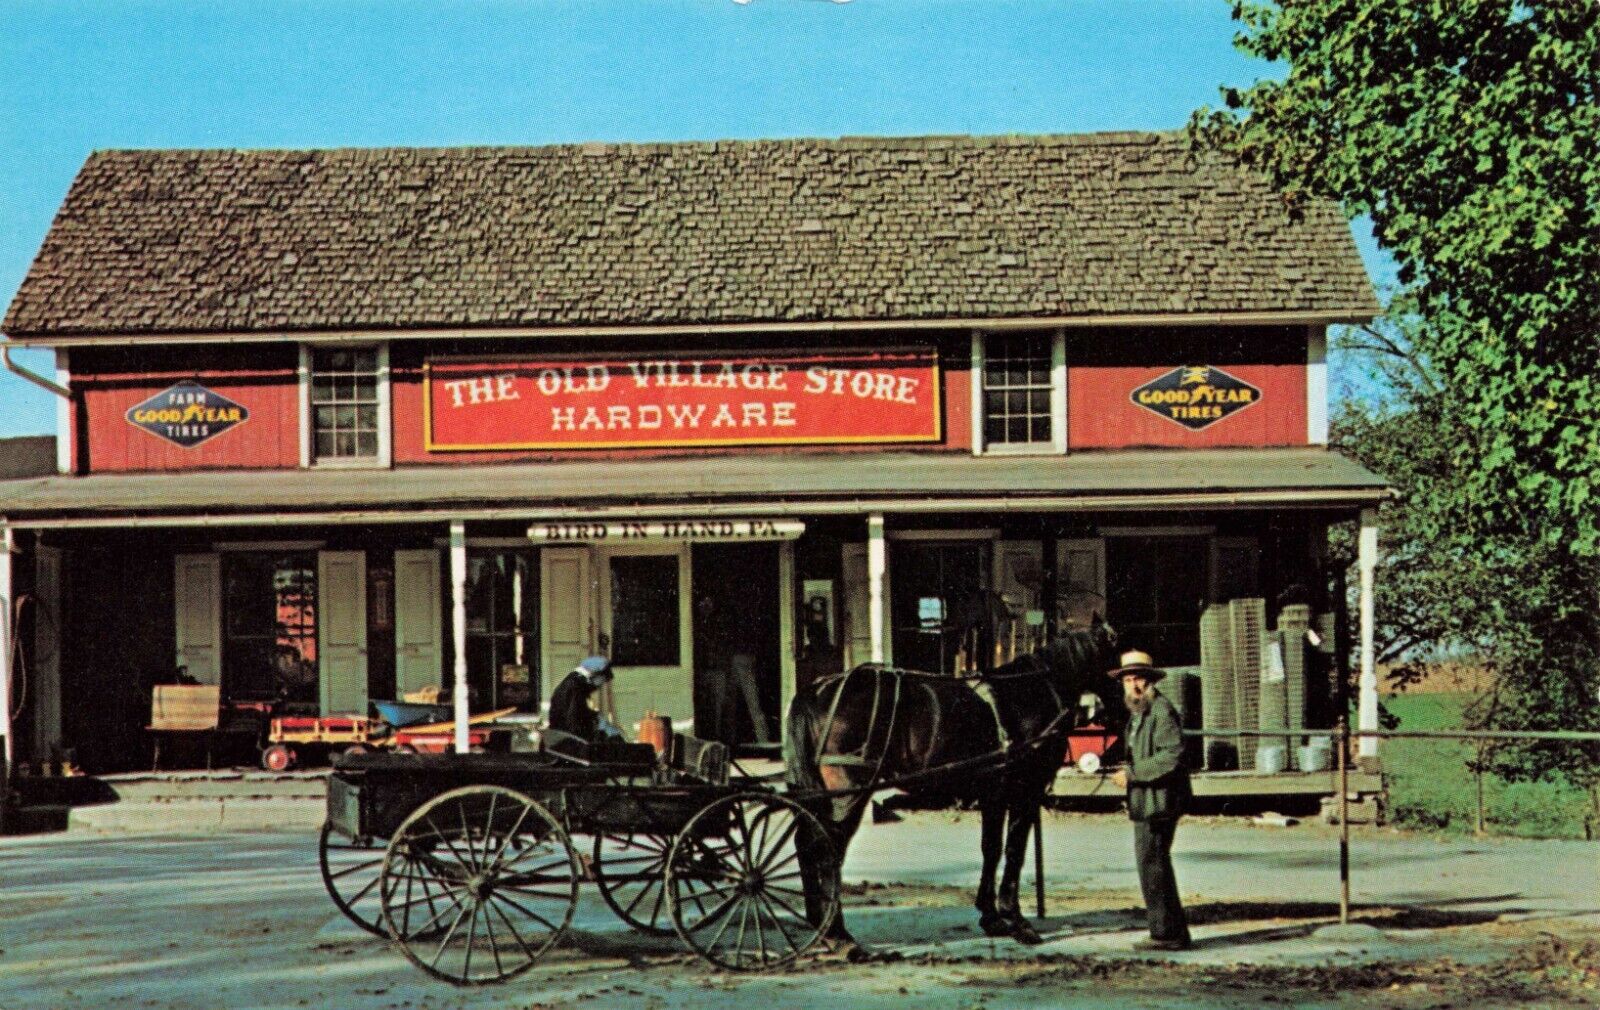 Postcard Amish Country The Old Village Store Shopping Horse Carriage Wagon